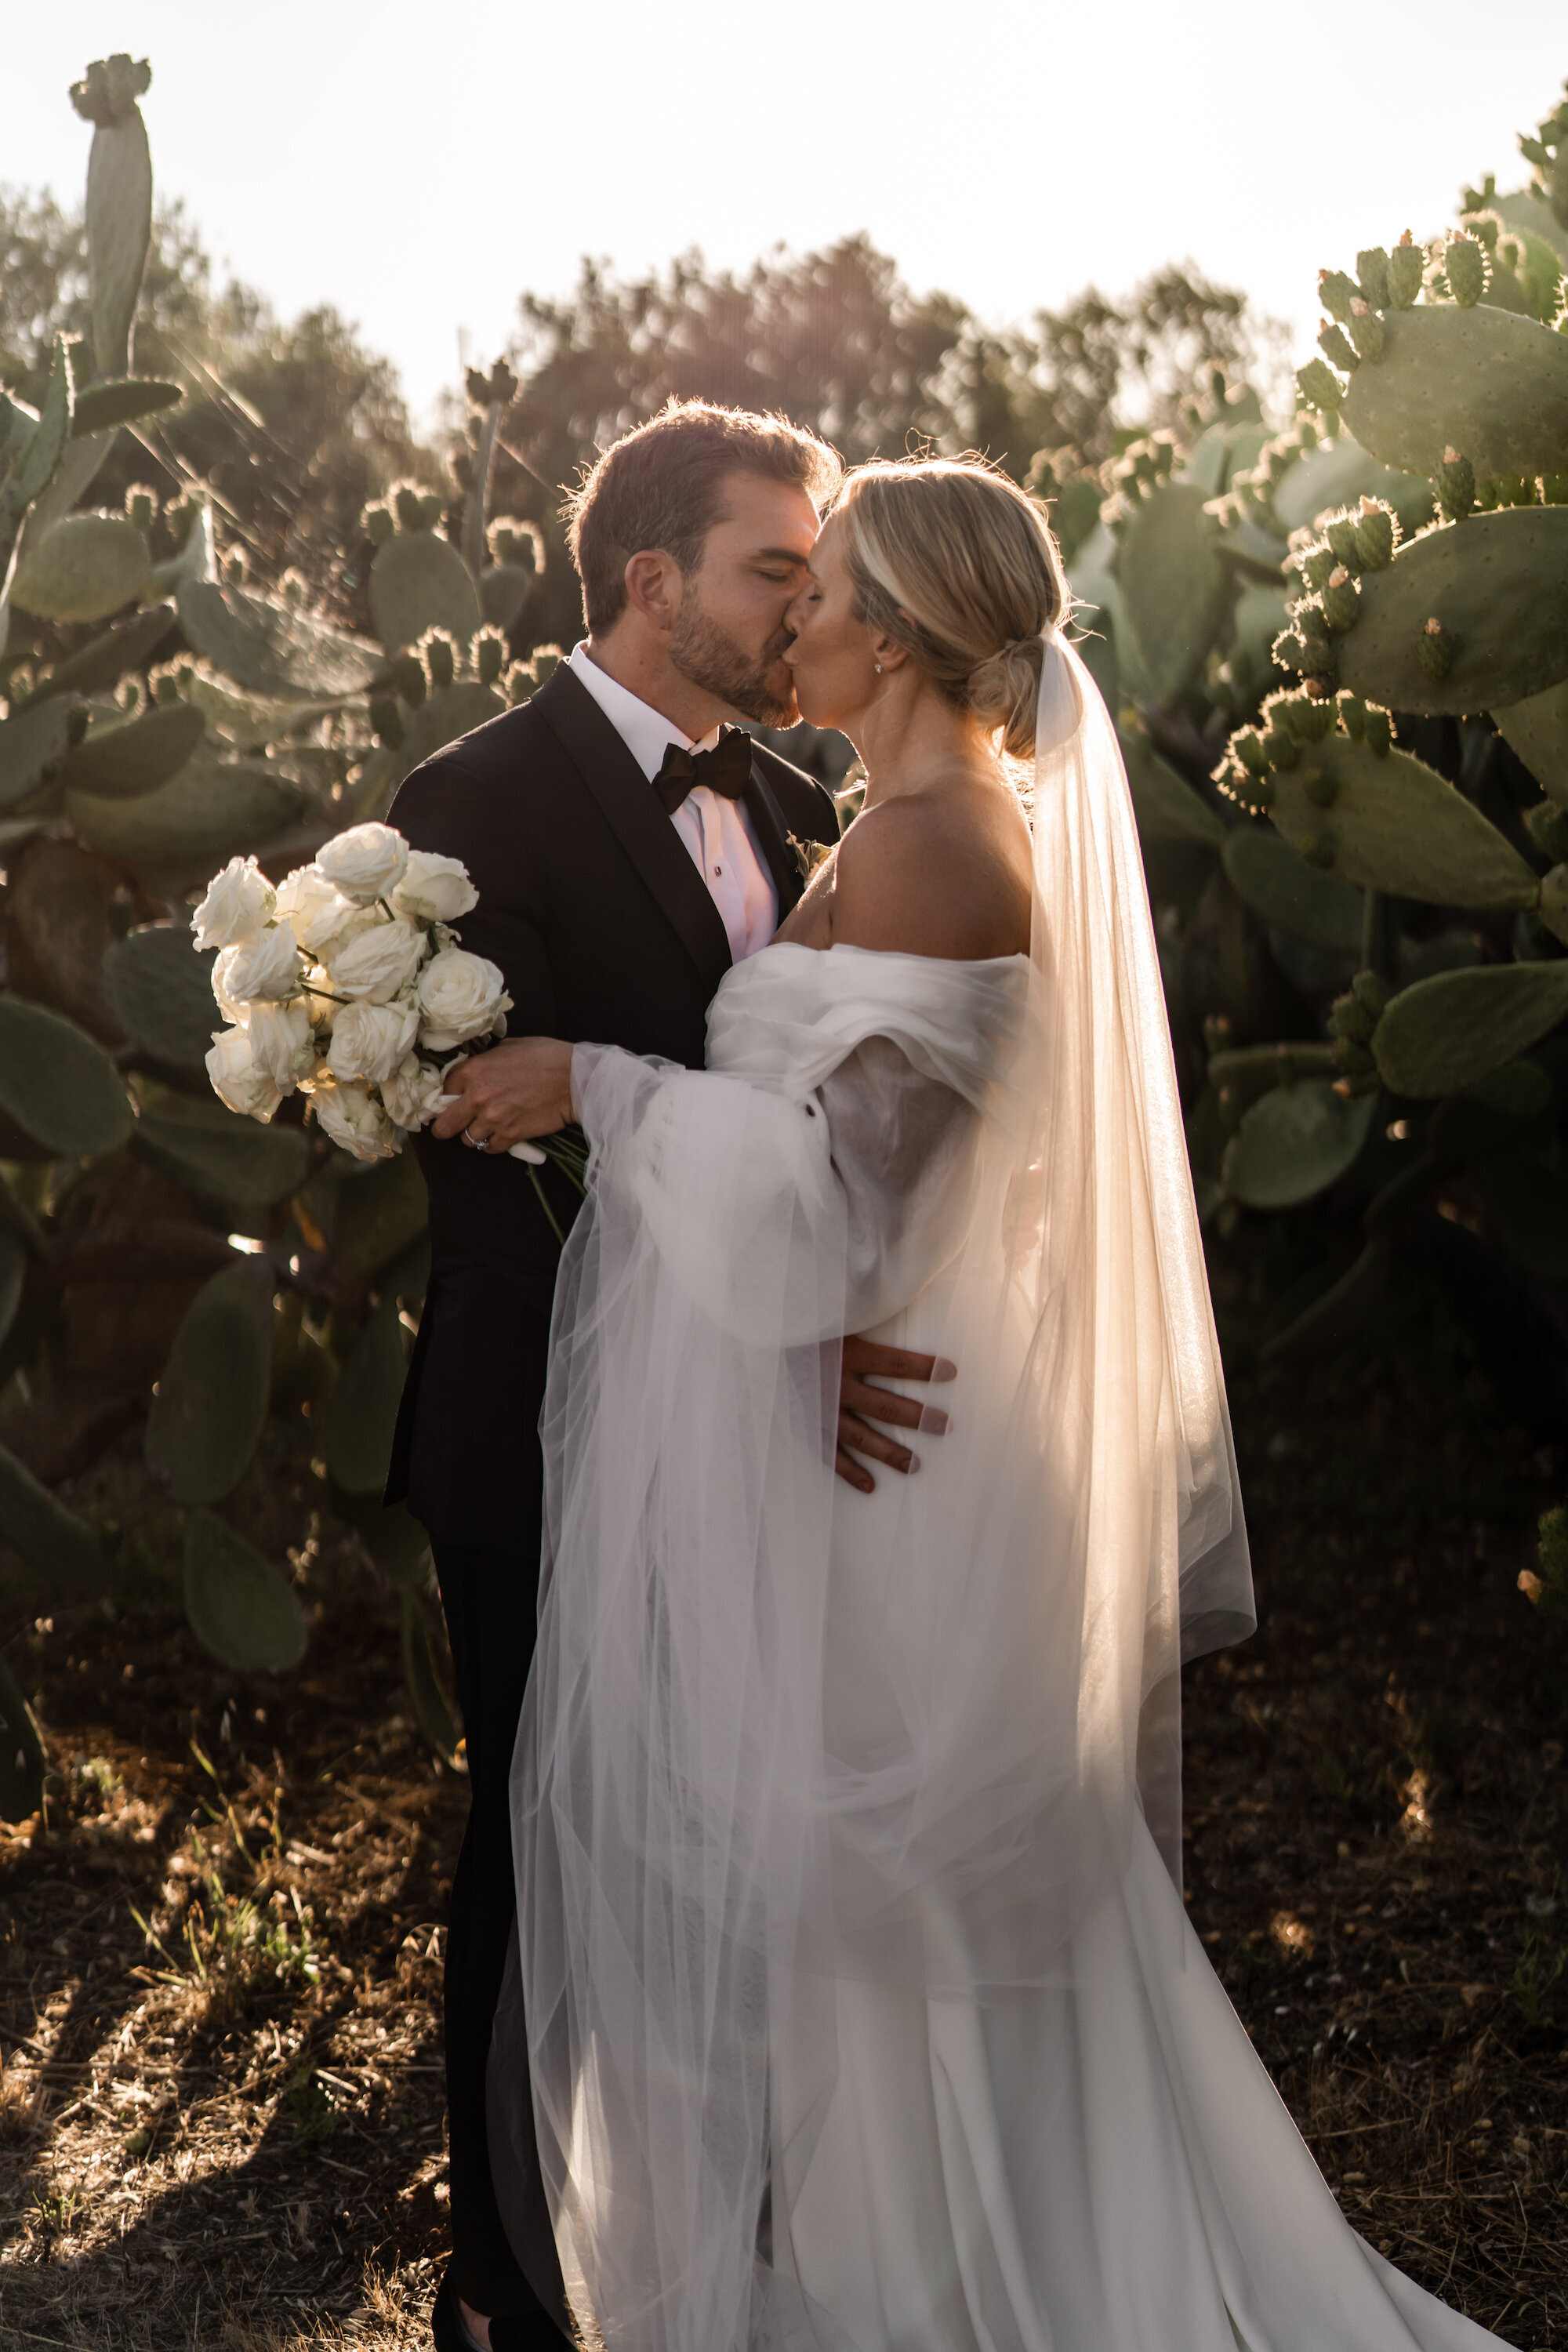 Bride and groom kiss next to prickly pear plants in Ostuni. Bride is holding a bouquet of only white roses